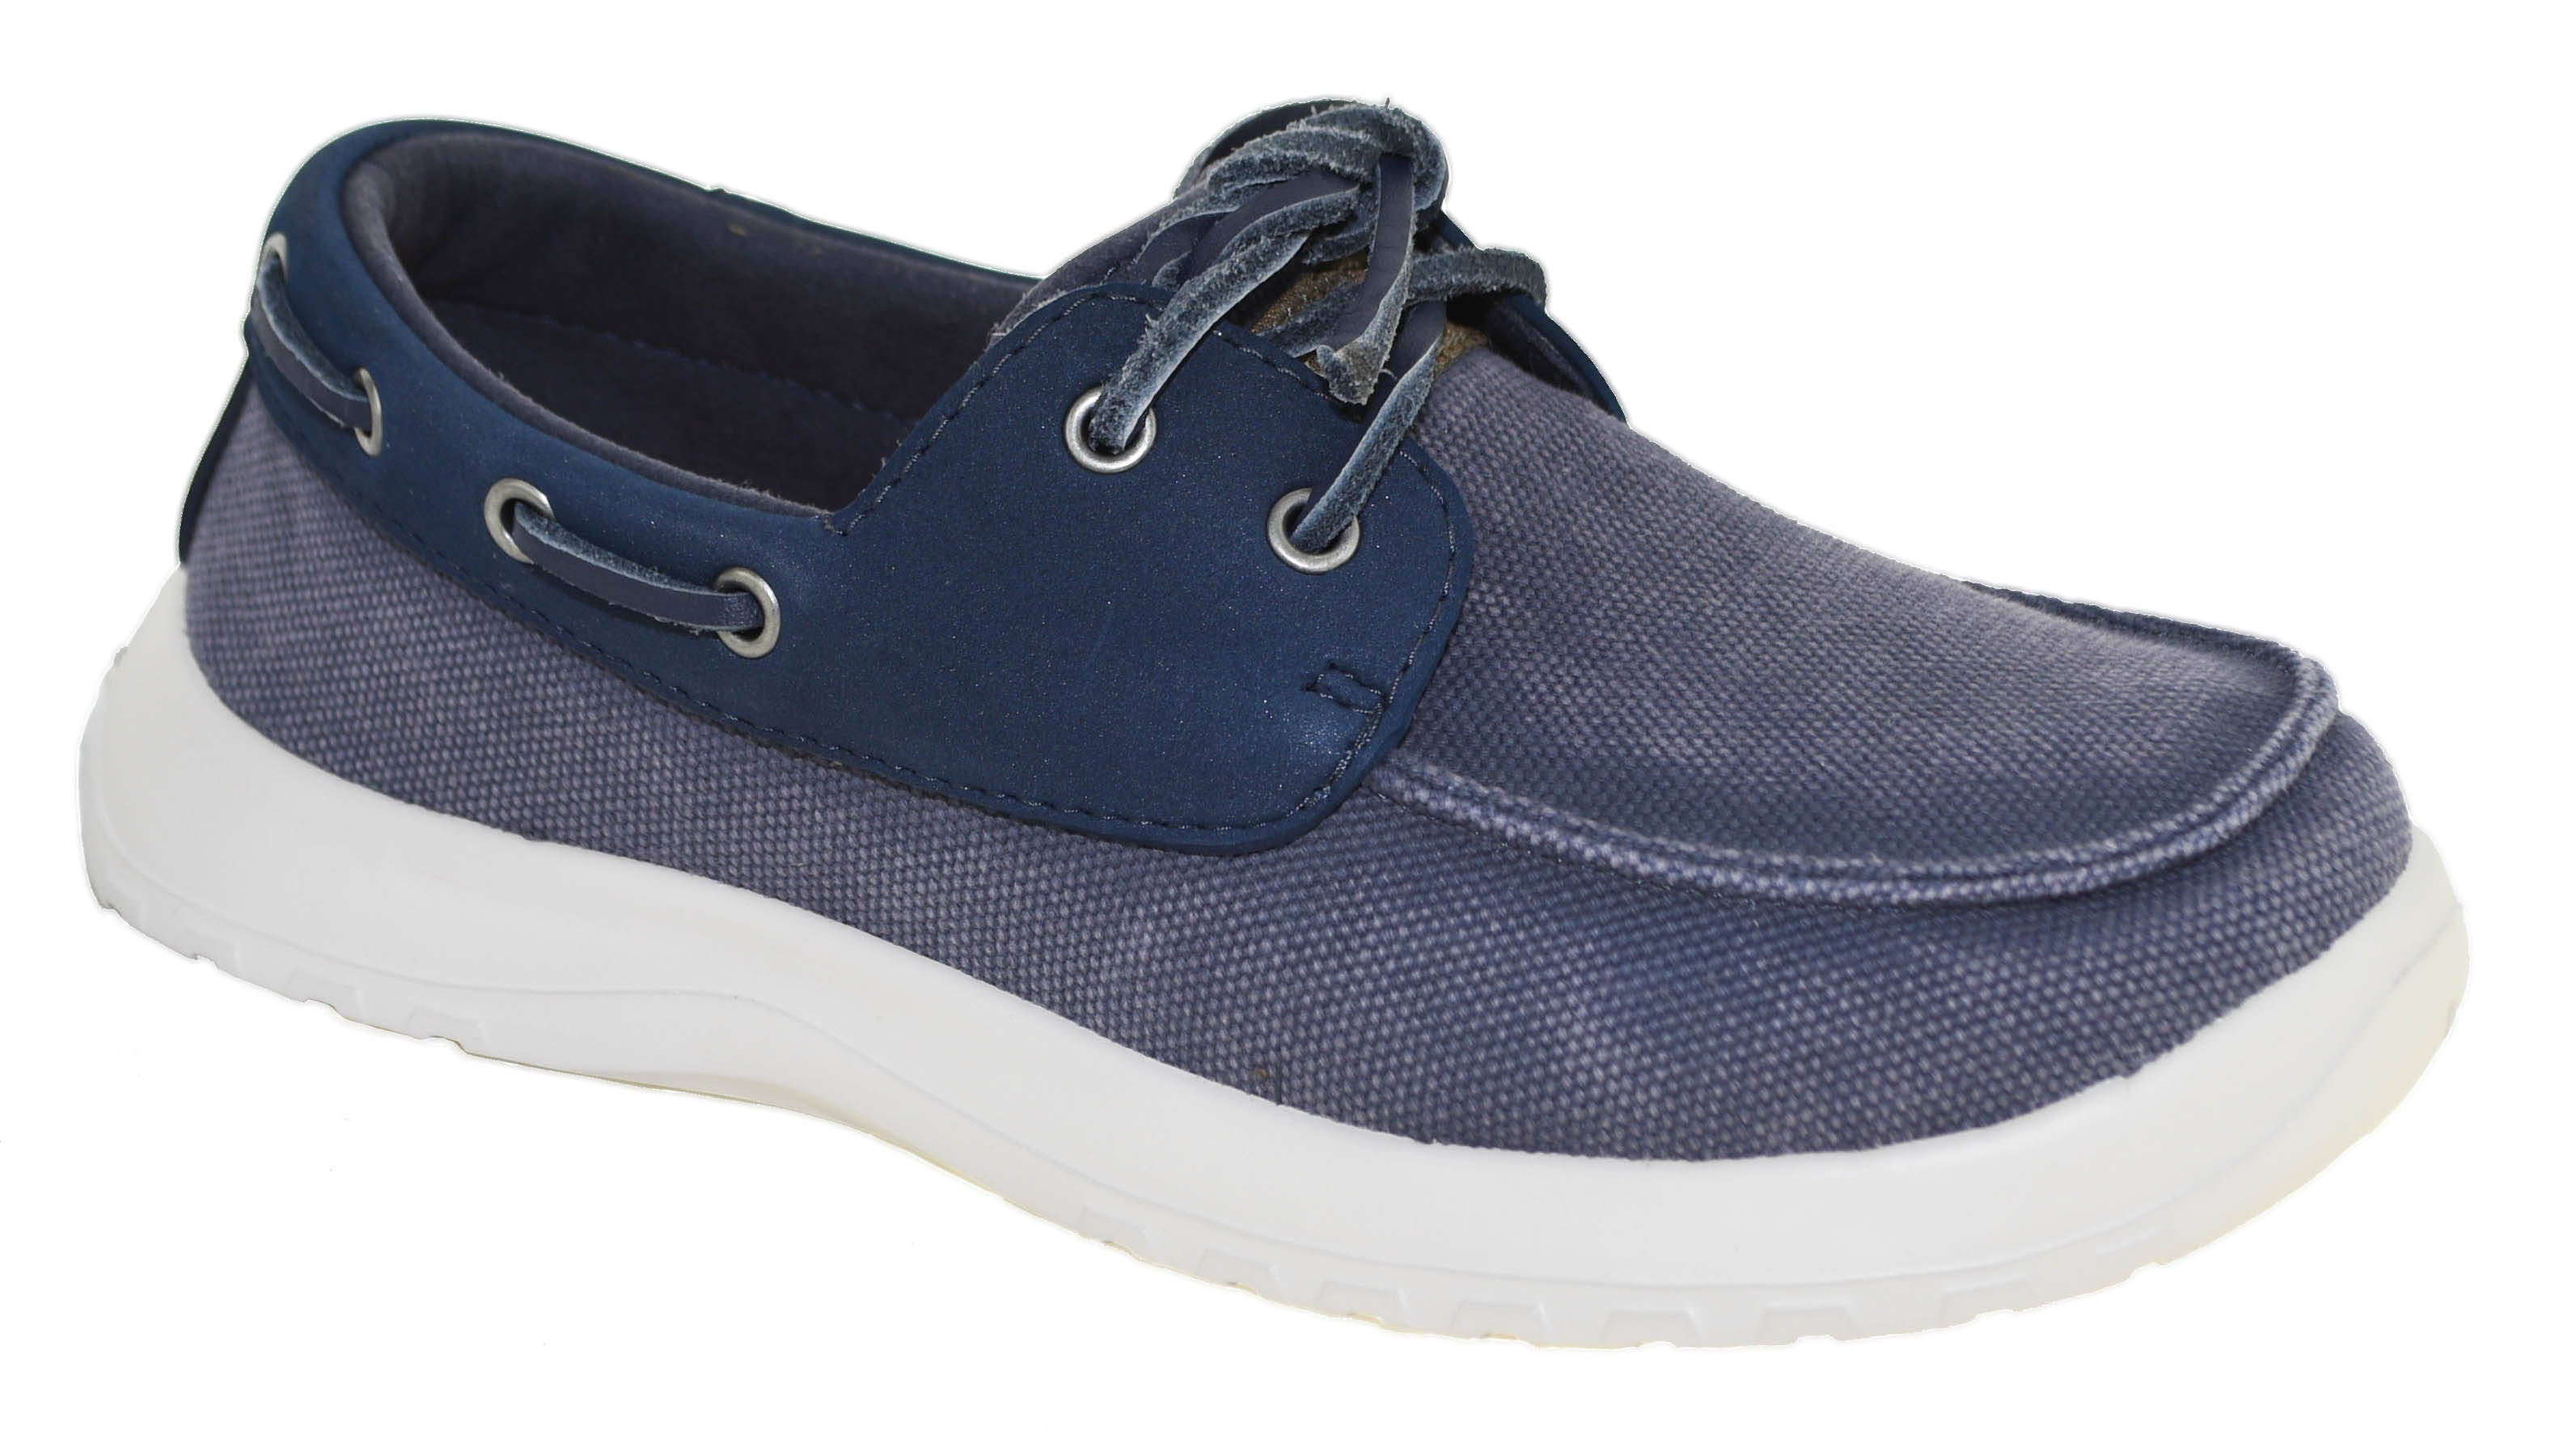 soft science boat shoes